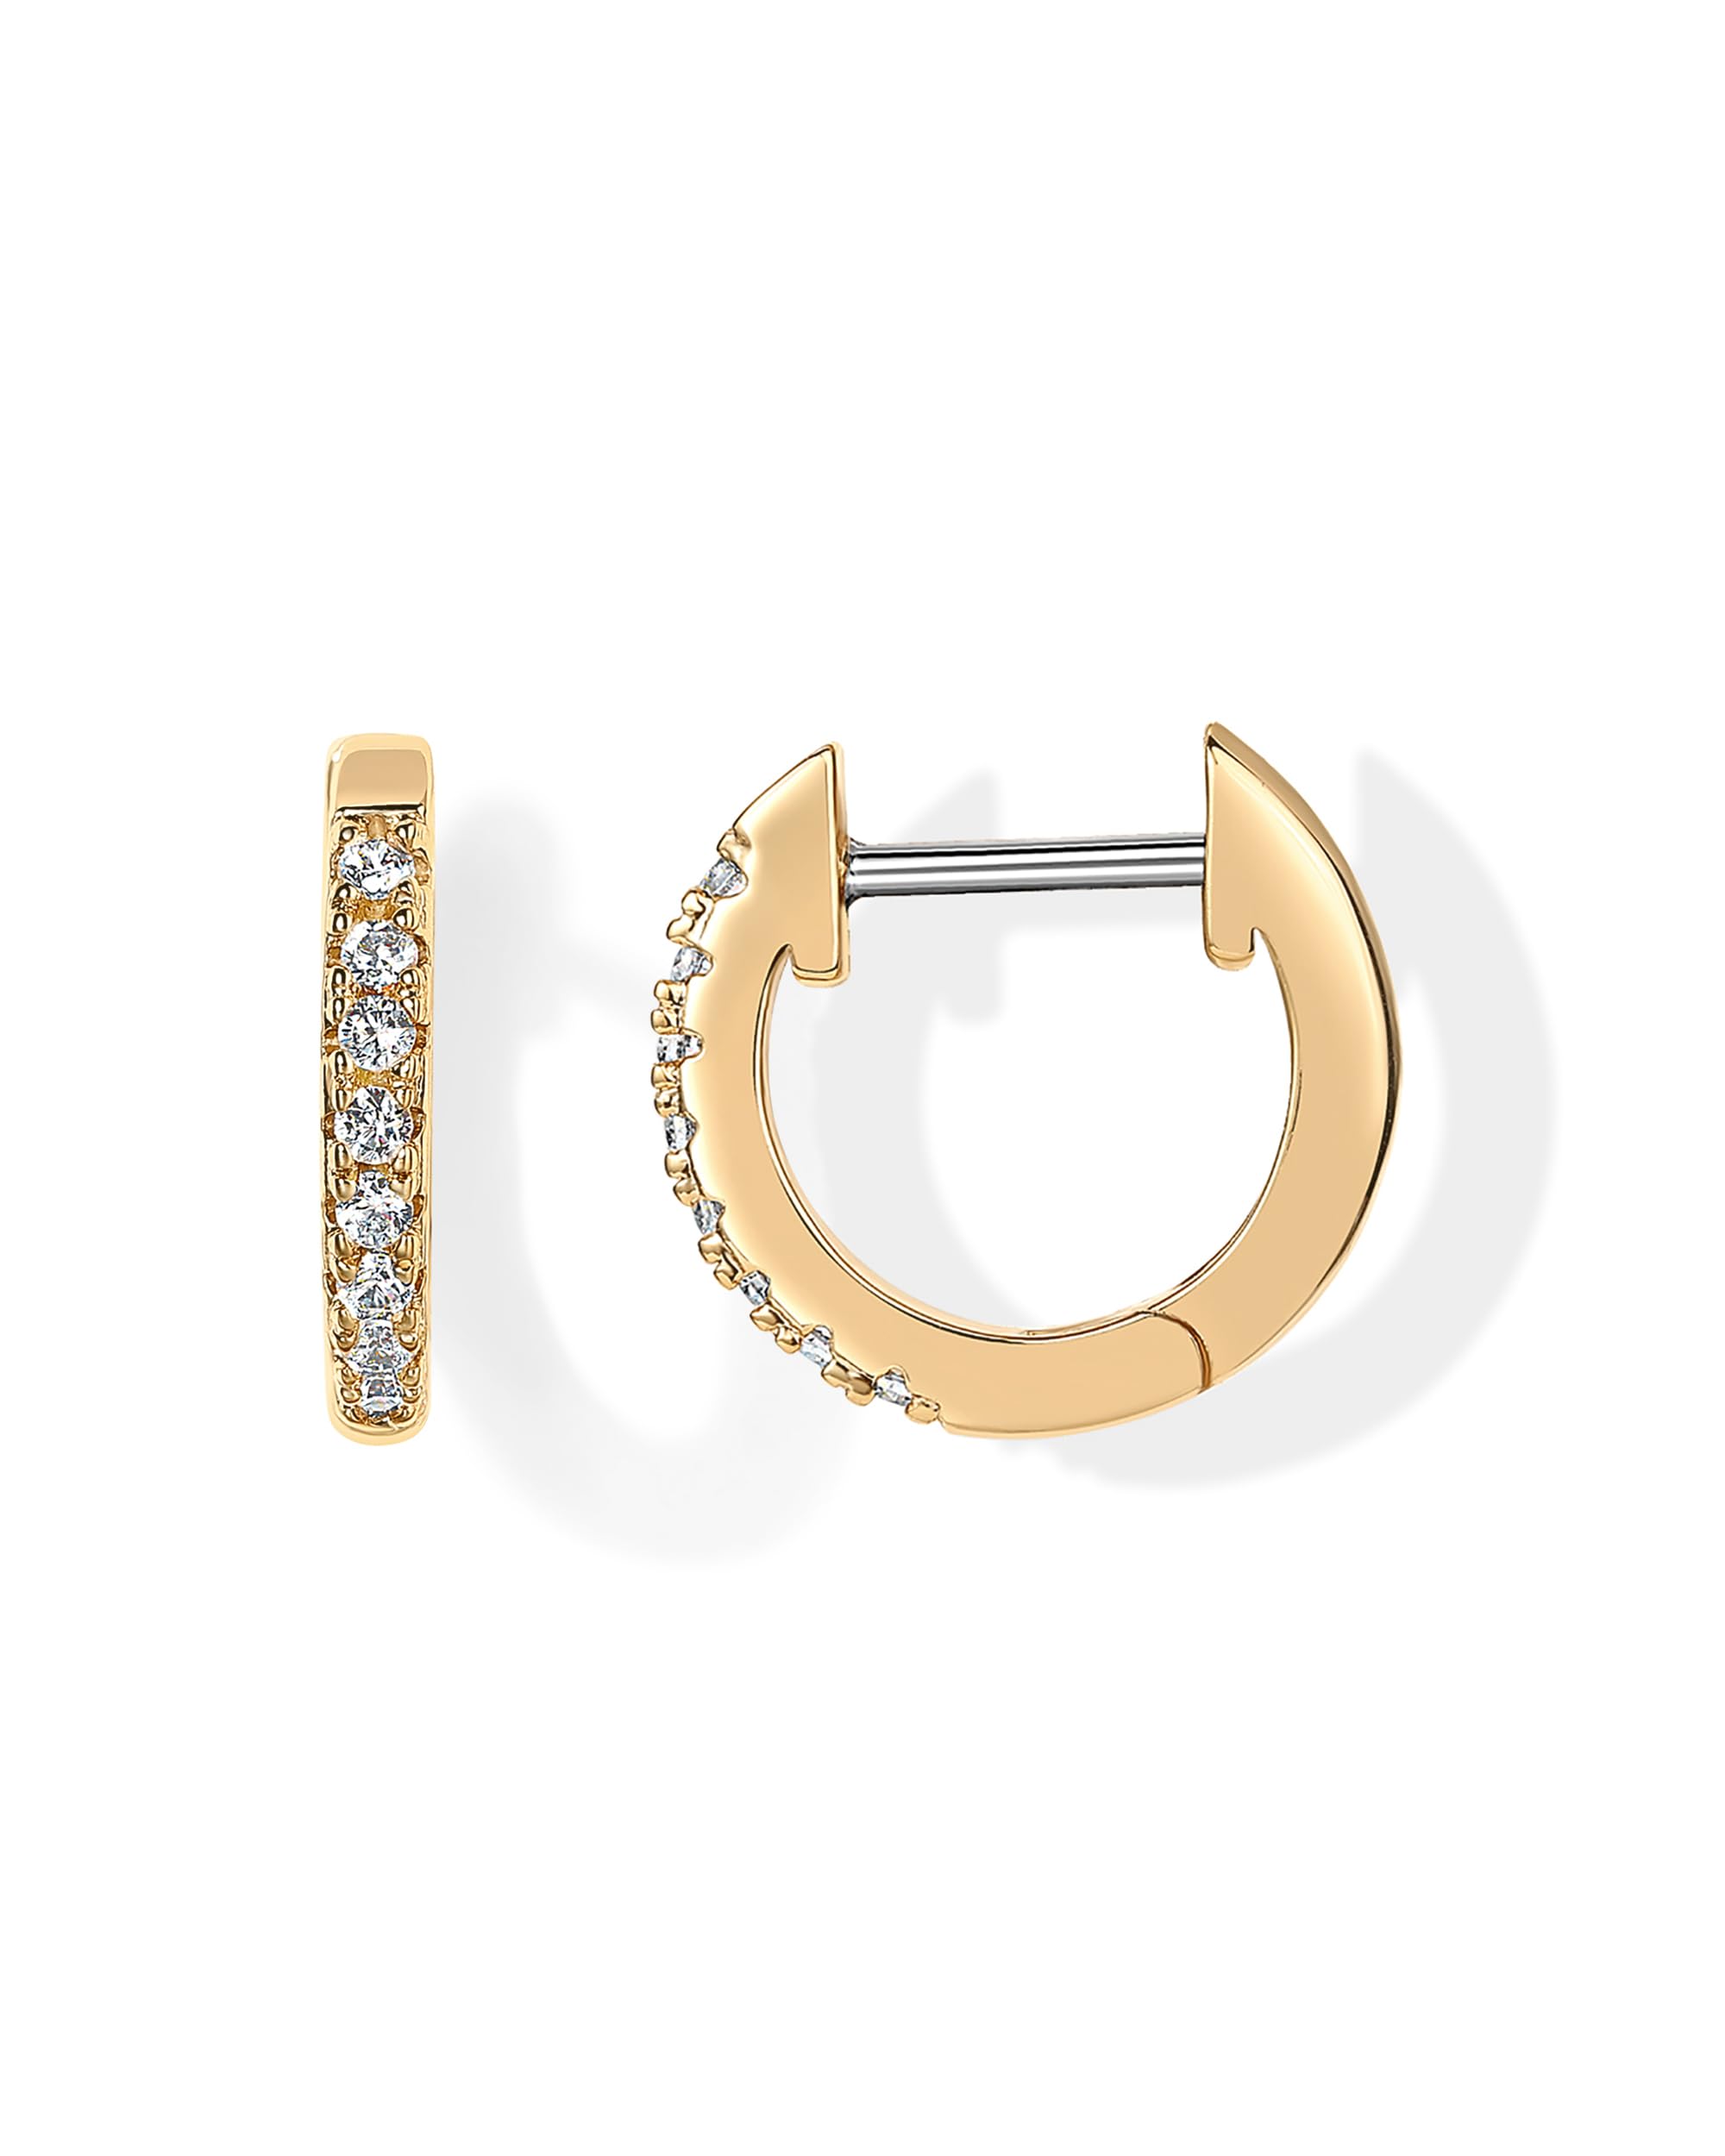 PAVOI Womens 14K Yellow Gold-Plated-Base Cubic Zirconia Cuff Earring